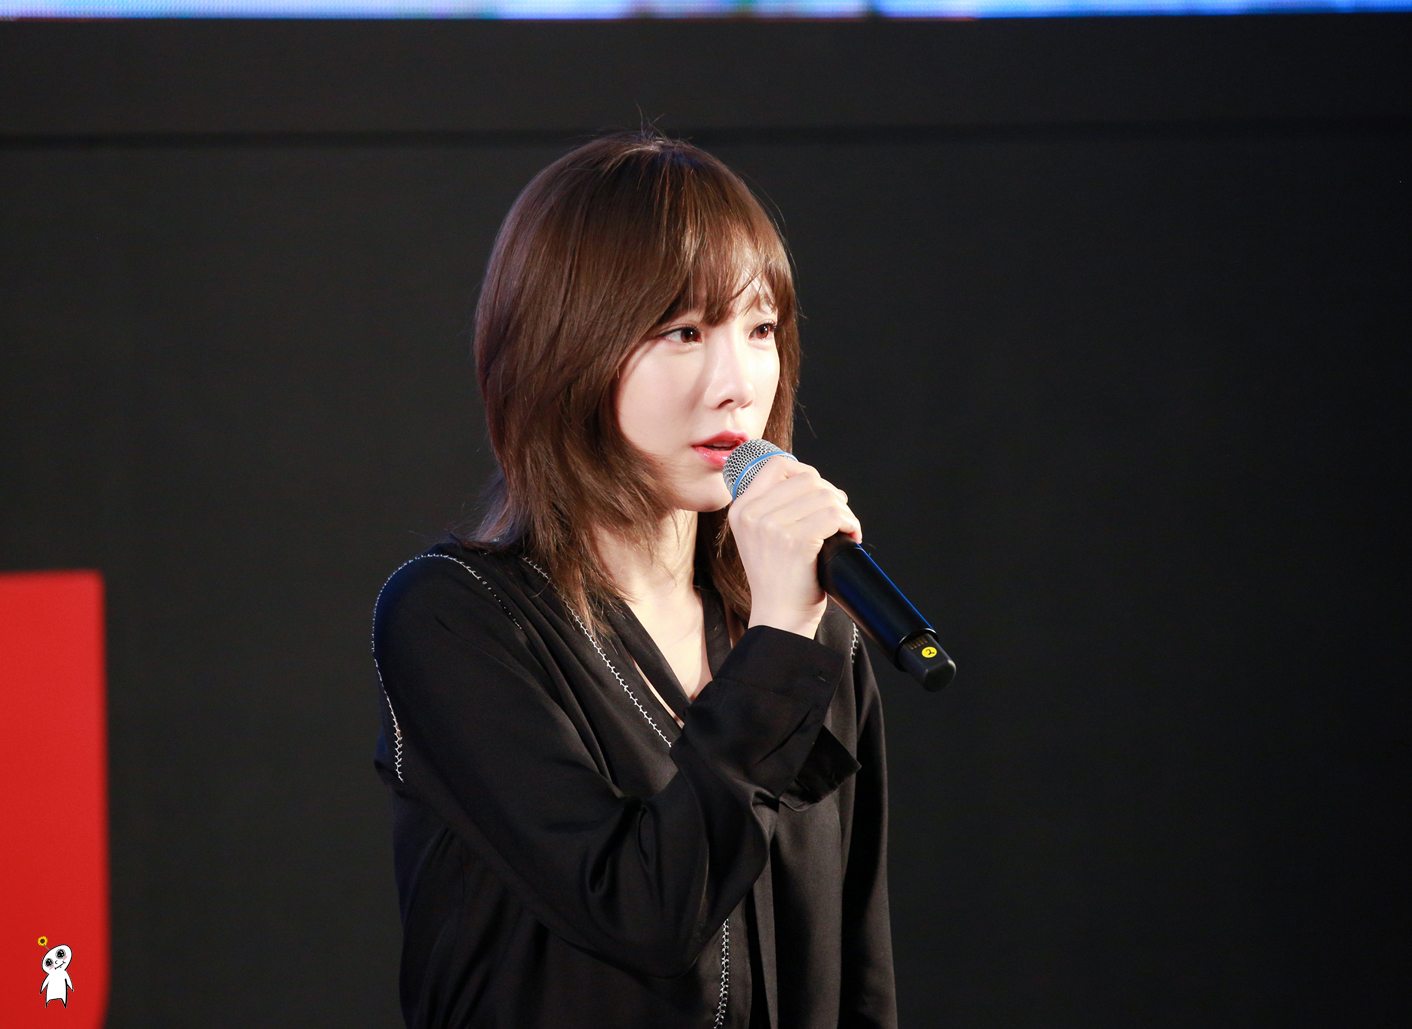 Taeyeon thanking fans at the end of the event.